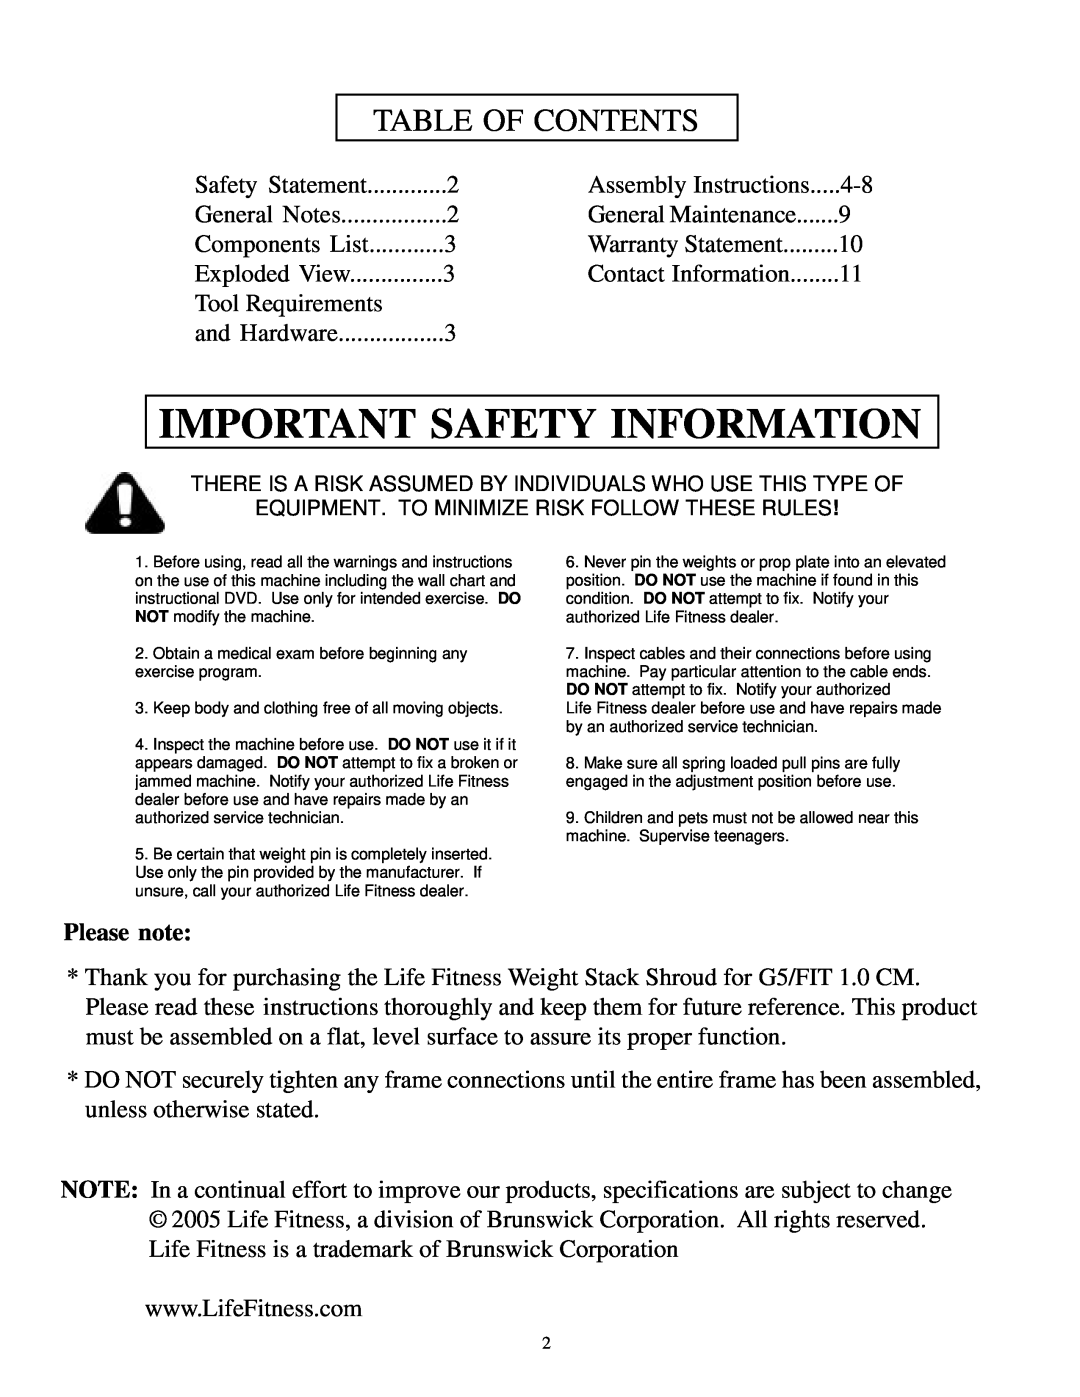 Life Fitness G5/FIT 1.0 CM manual Important Safety Information, Please note, Table Of Contents 